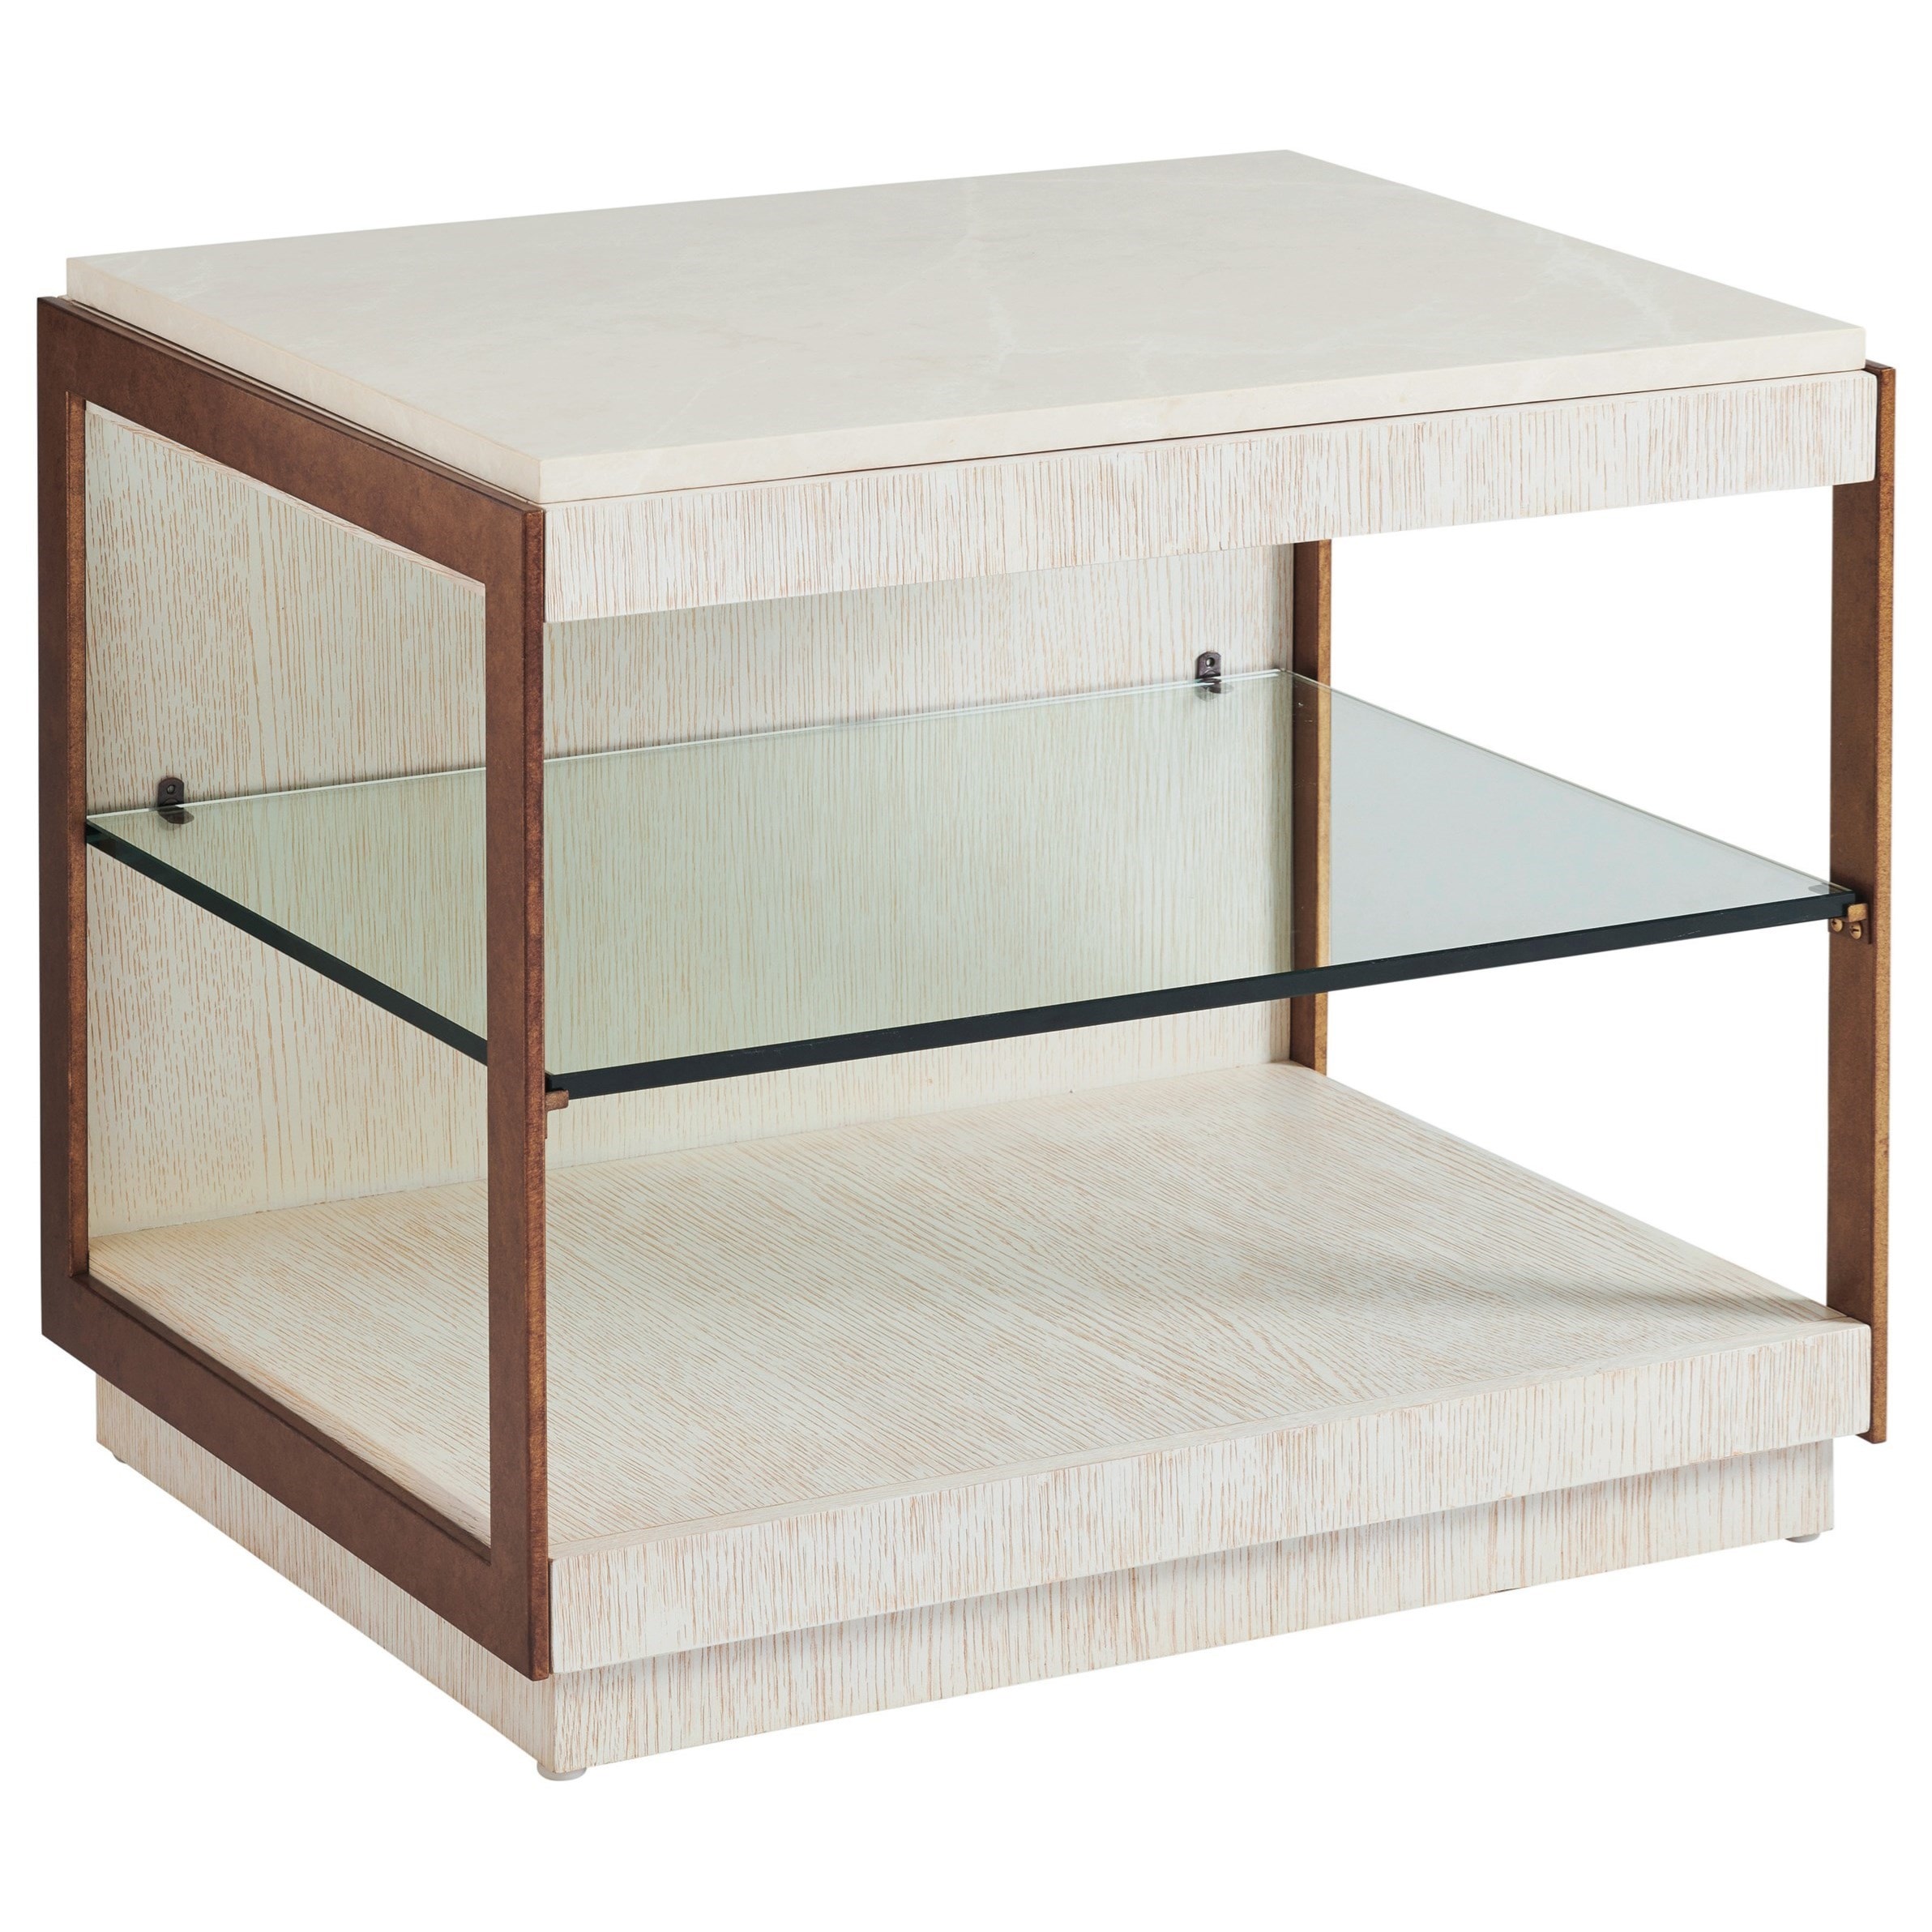 Barclay Butera Carmel 931-955 Point Lobos Rectangular End Table with  Concours Marble Top Belfort Furniture End Tables